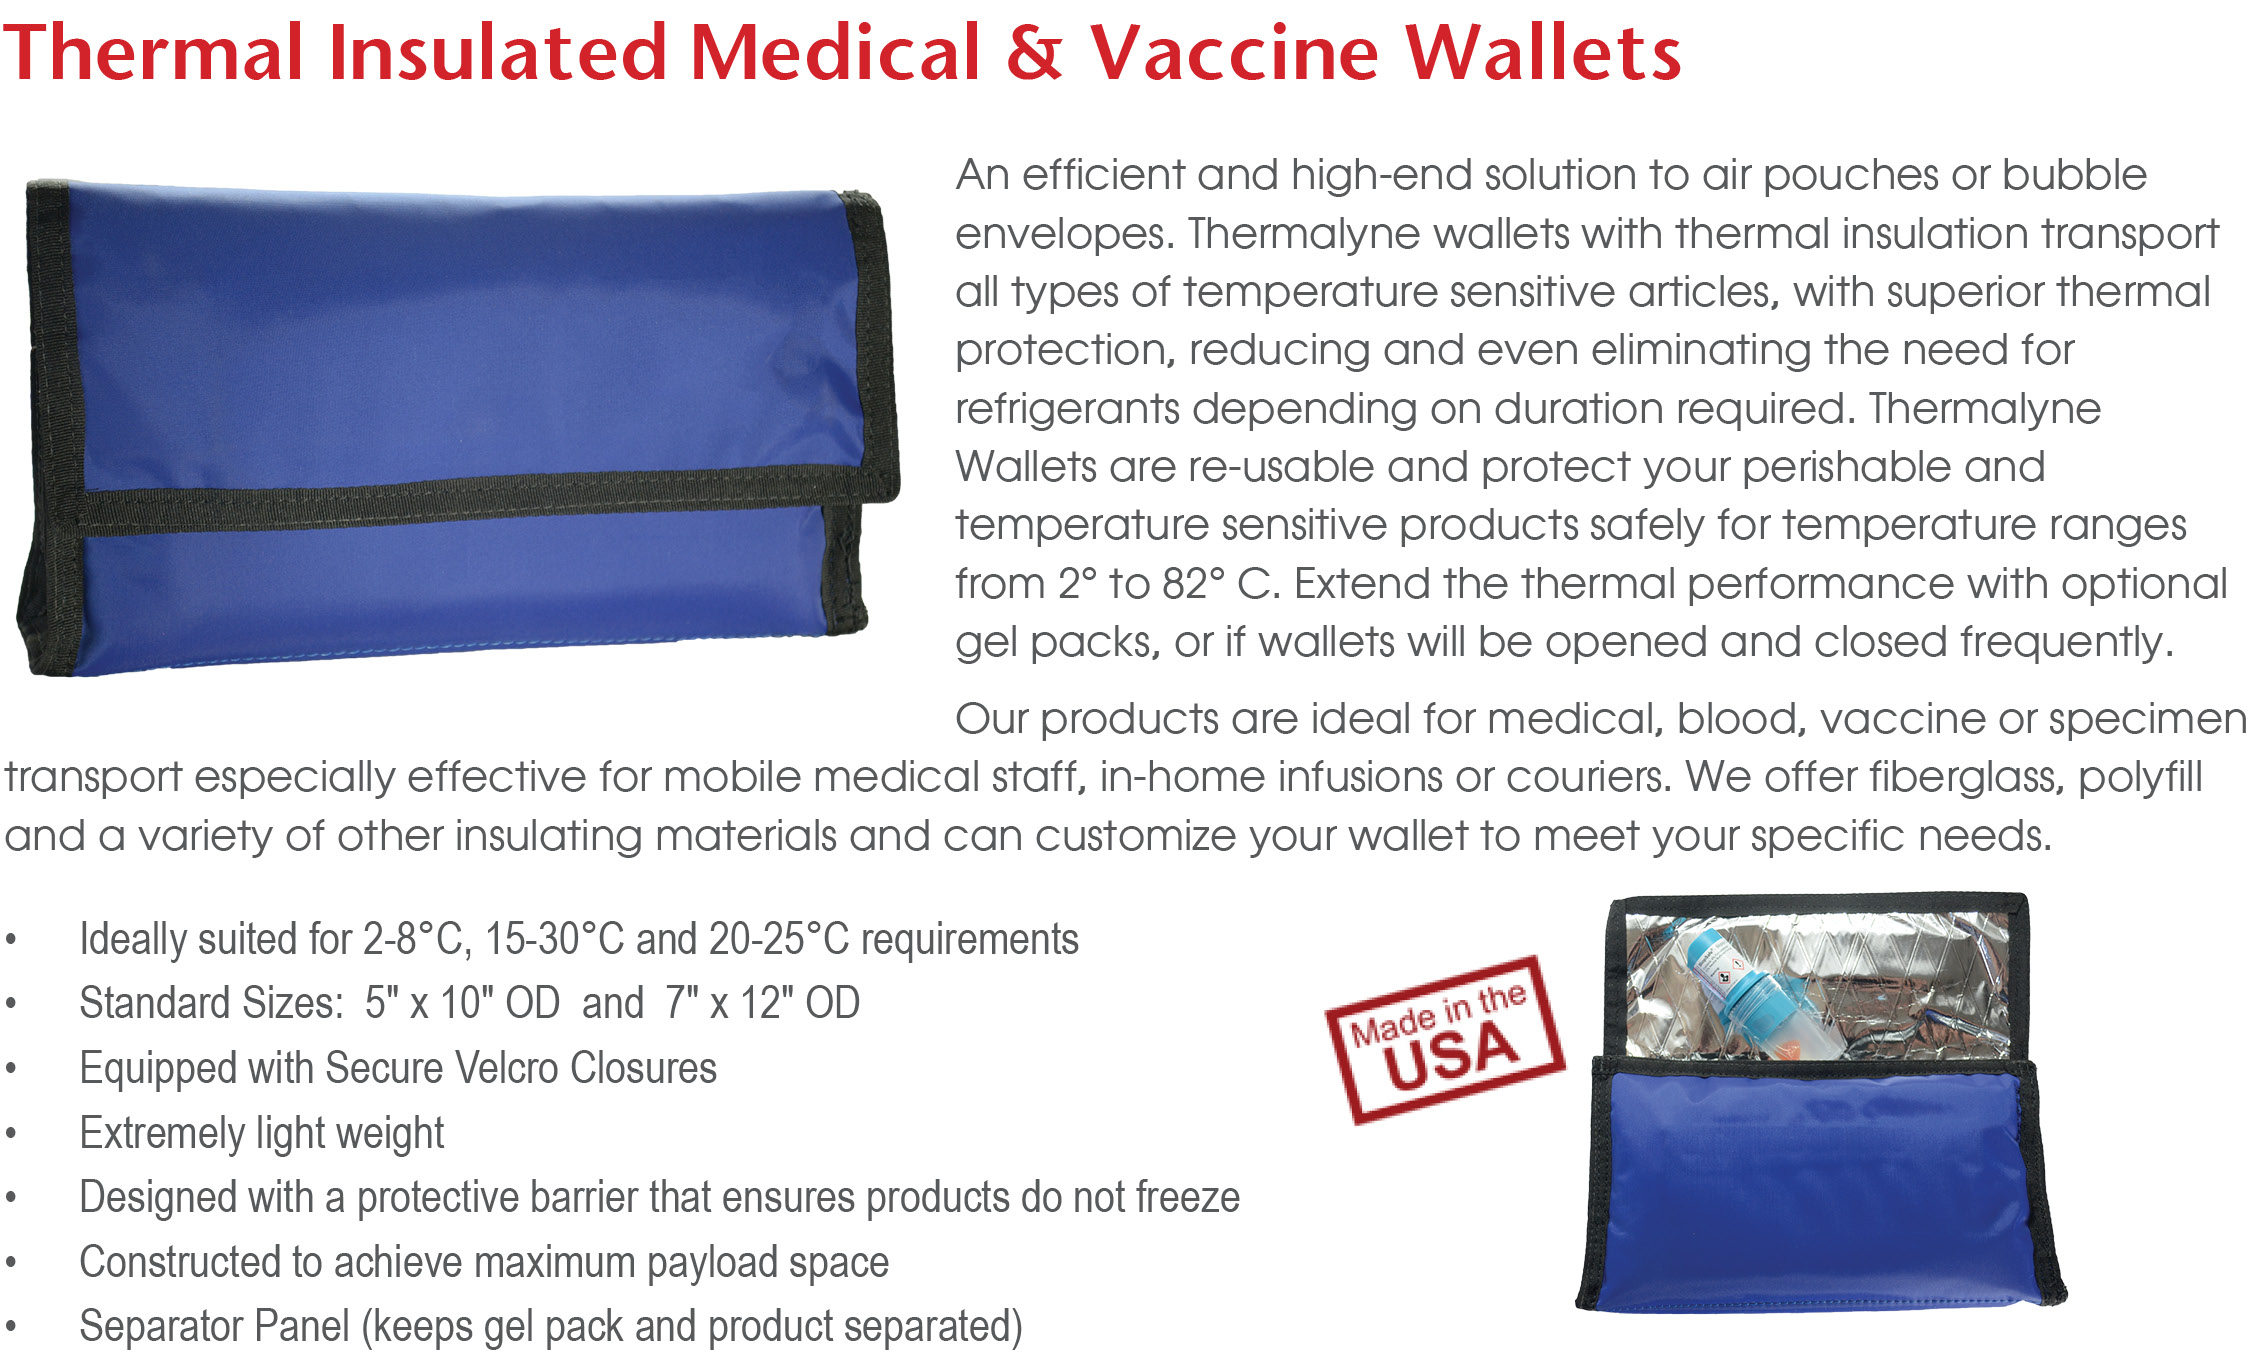 Thermal Insulated Medical & Vaccine Wallets